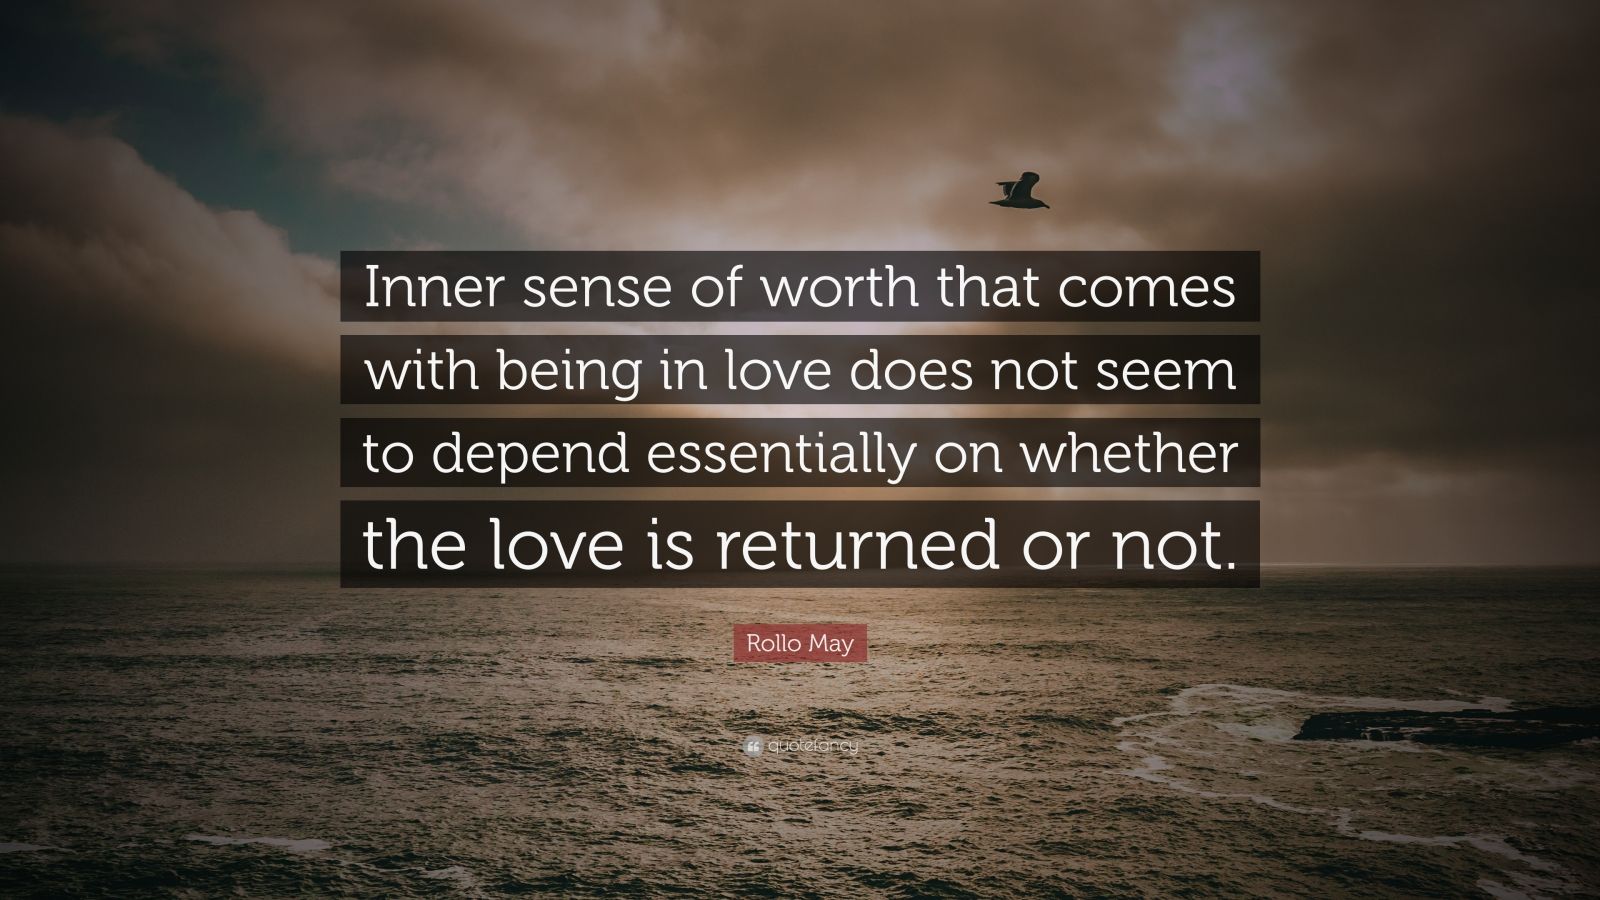 Rollo May Quote: “Inner sense of worth that comes with being in love ...